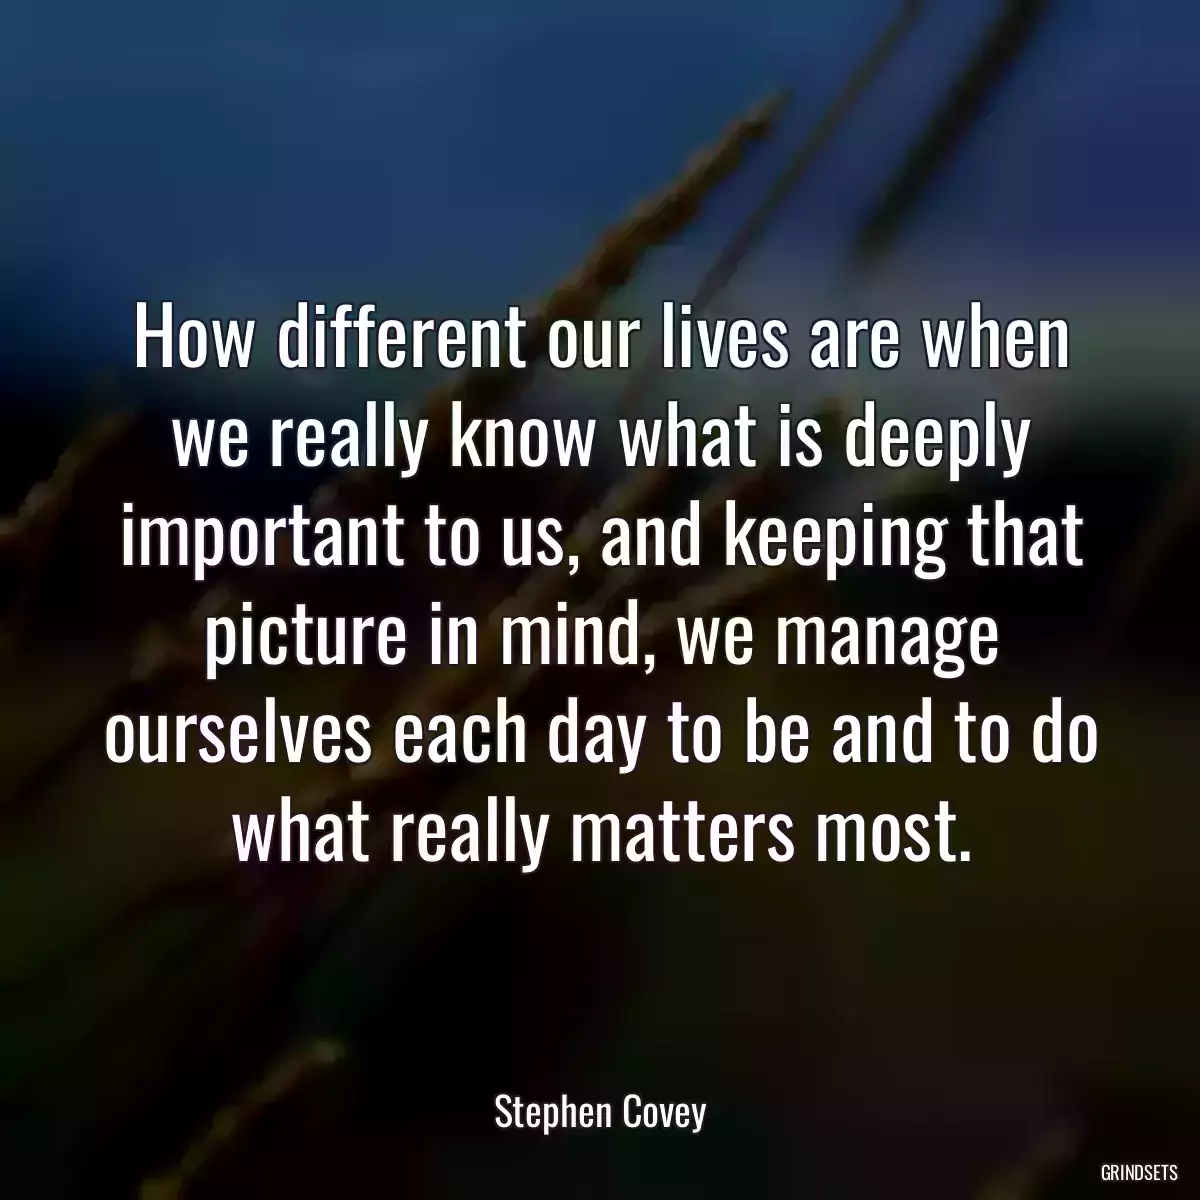 How different our lives are when we really know what is deeply important to us, and keeping that picture in mind, we manage ourselves each day to be and to do what really matters most.